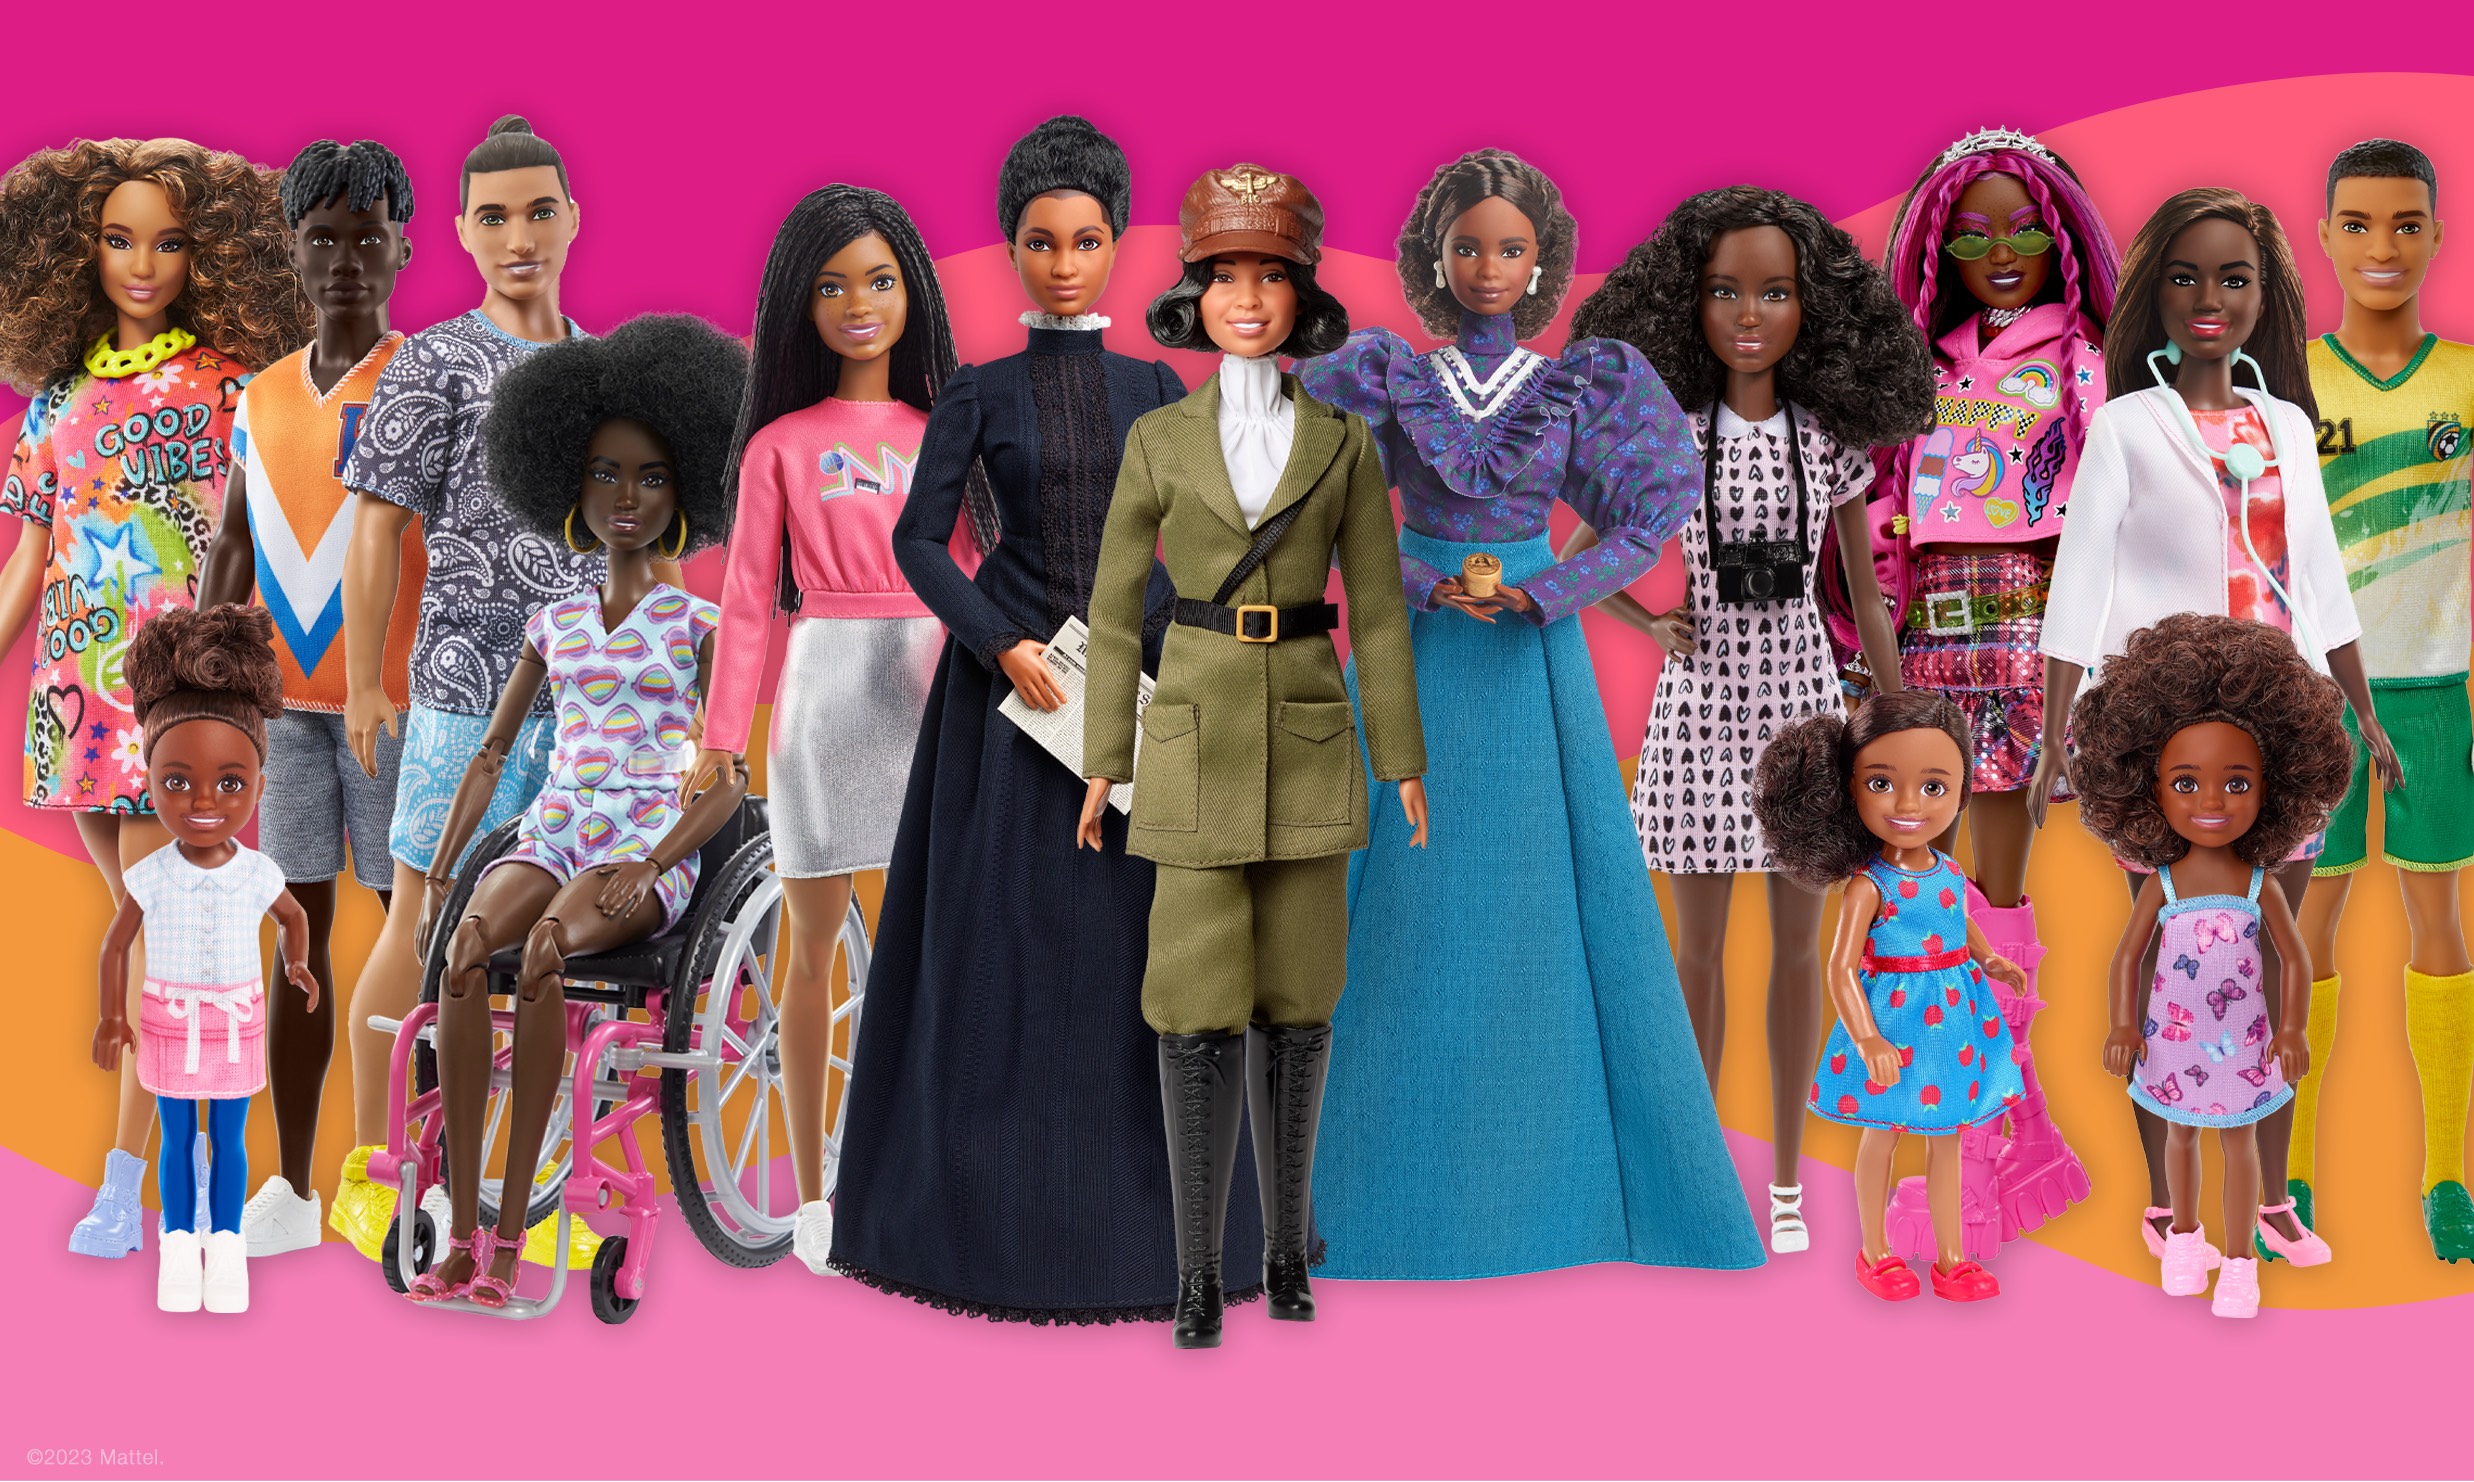 This Barbie has Down syndrome: See Mattel's inclusive doll - Los